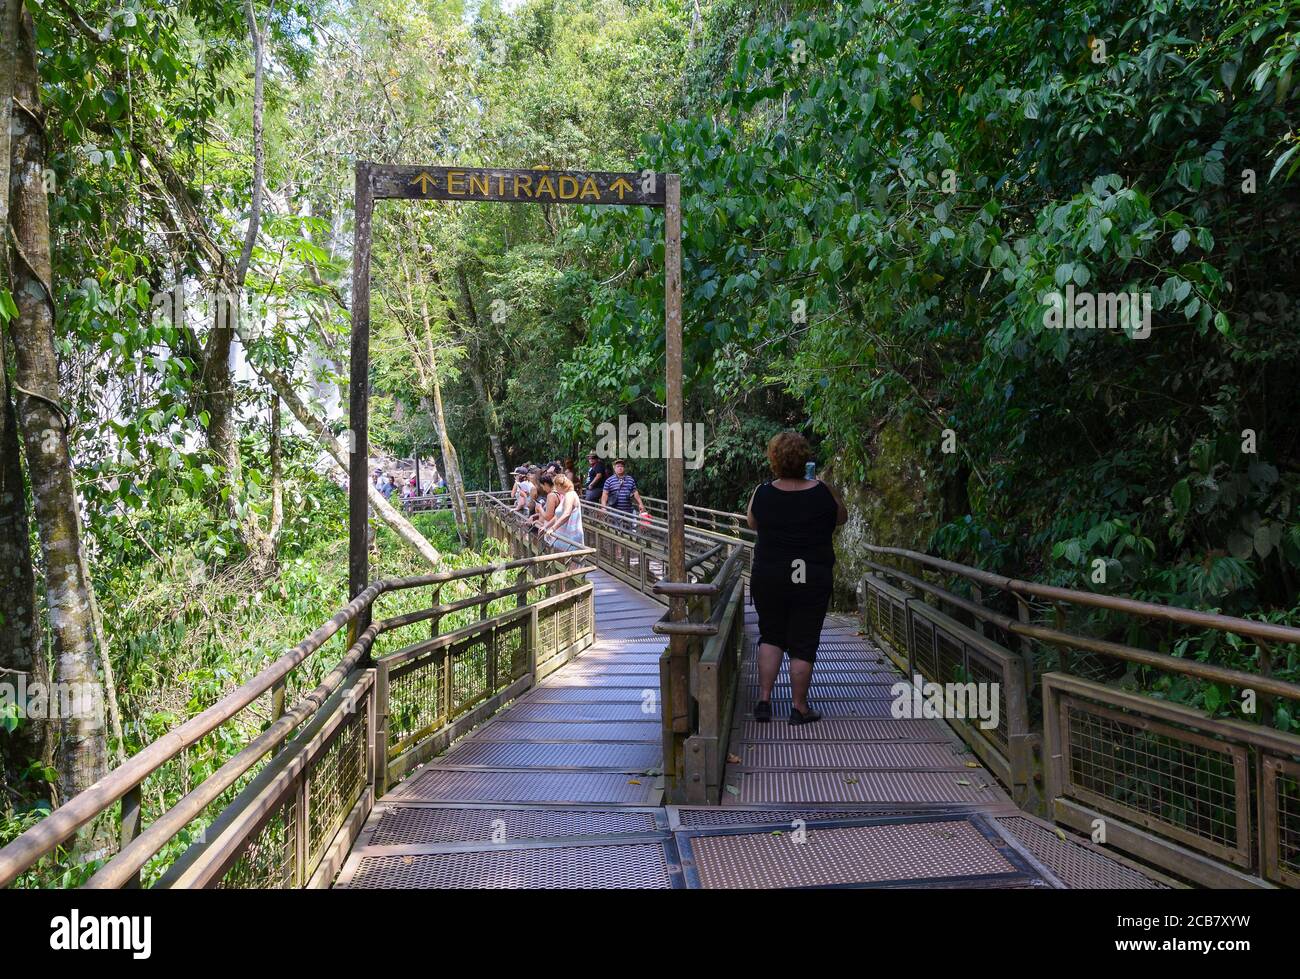 Walkway in the upper circuit of Iguazu National Park. Tourists in pathway through the forest. Entrance overhead sign. Stock Photo